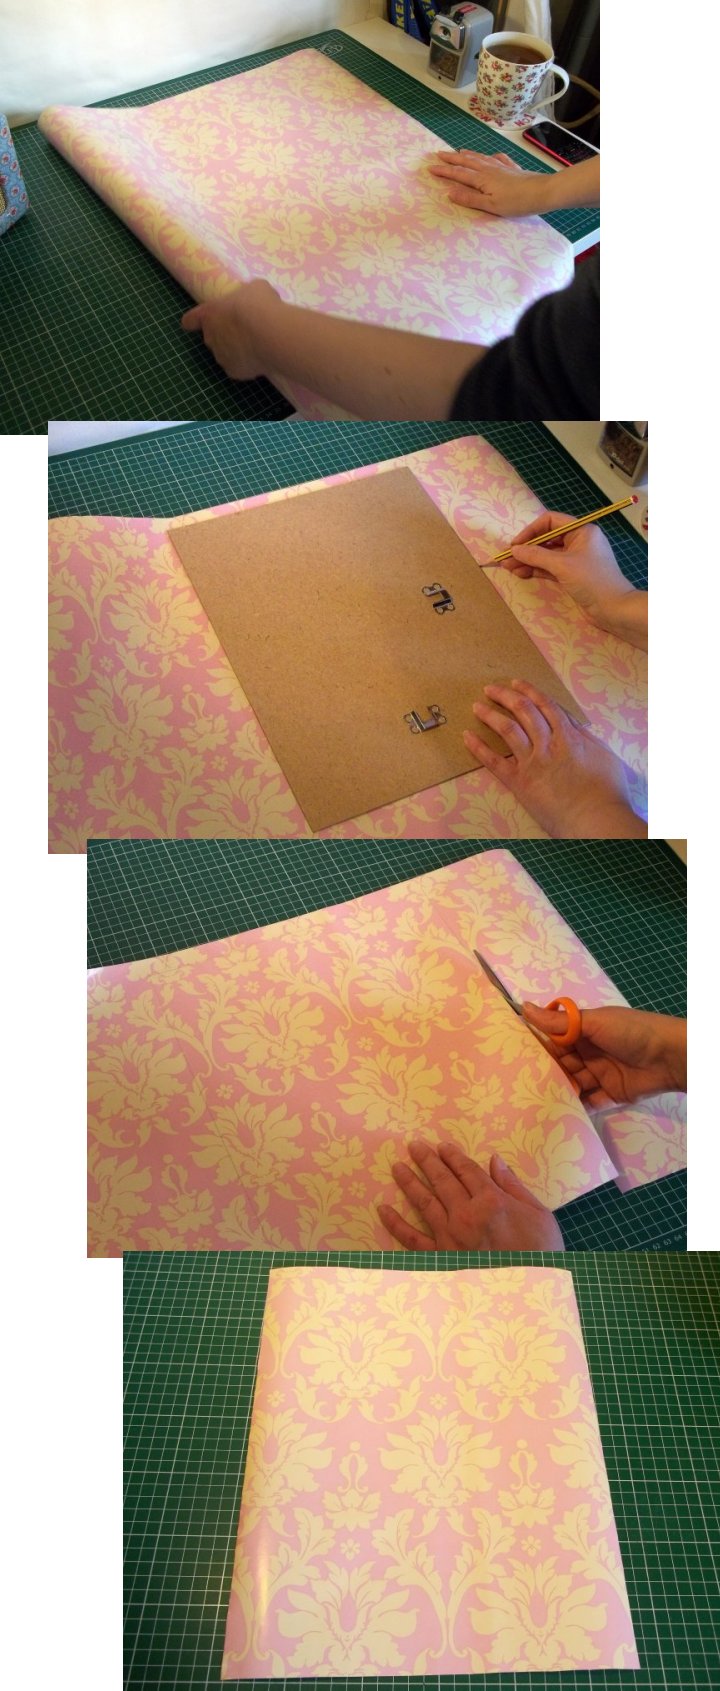 Things to make and do - Dry-wipe Memo Board 